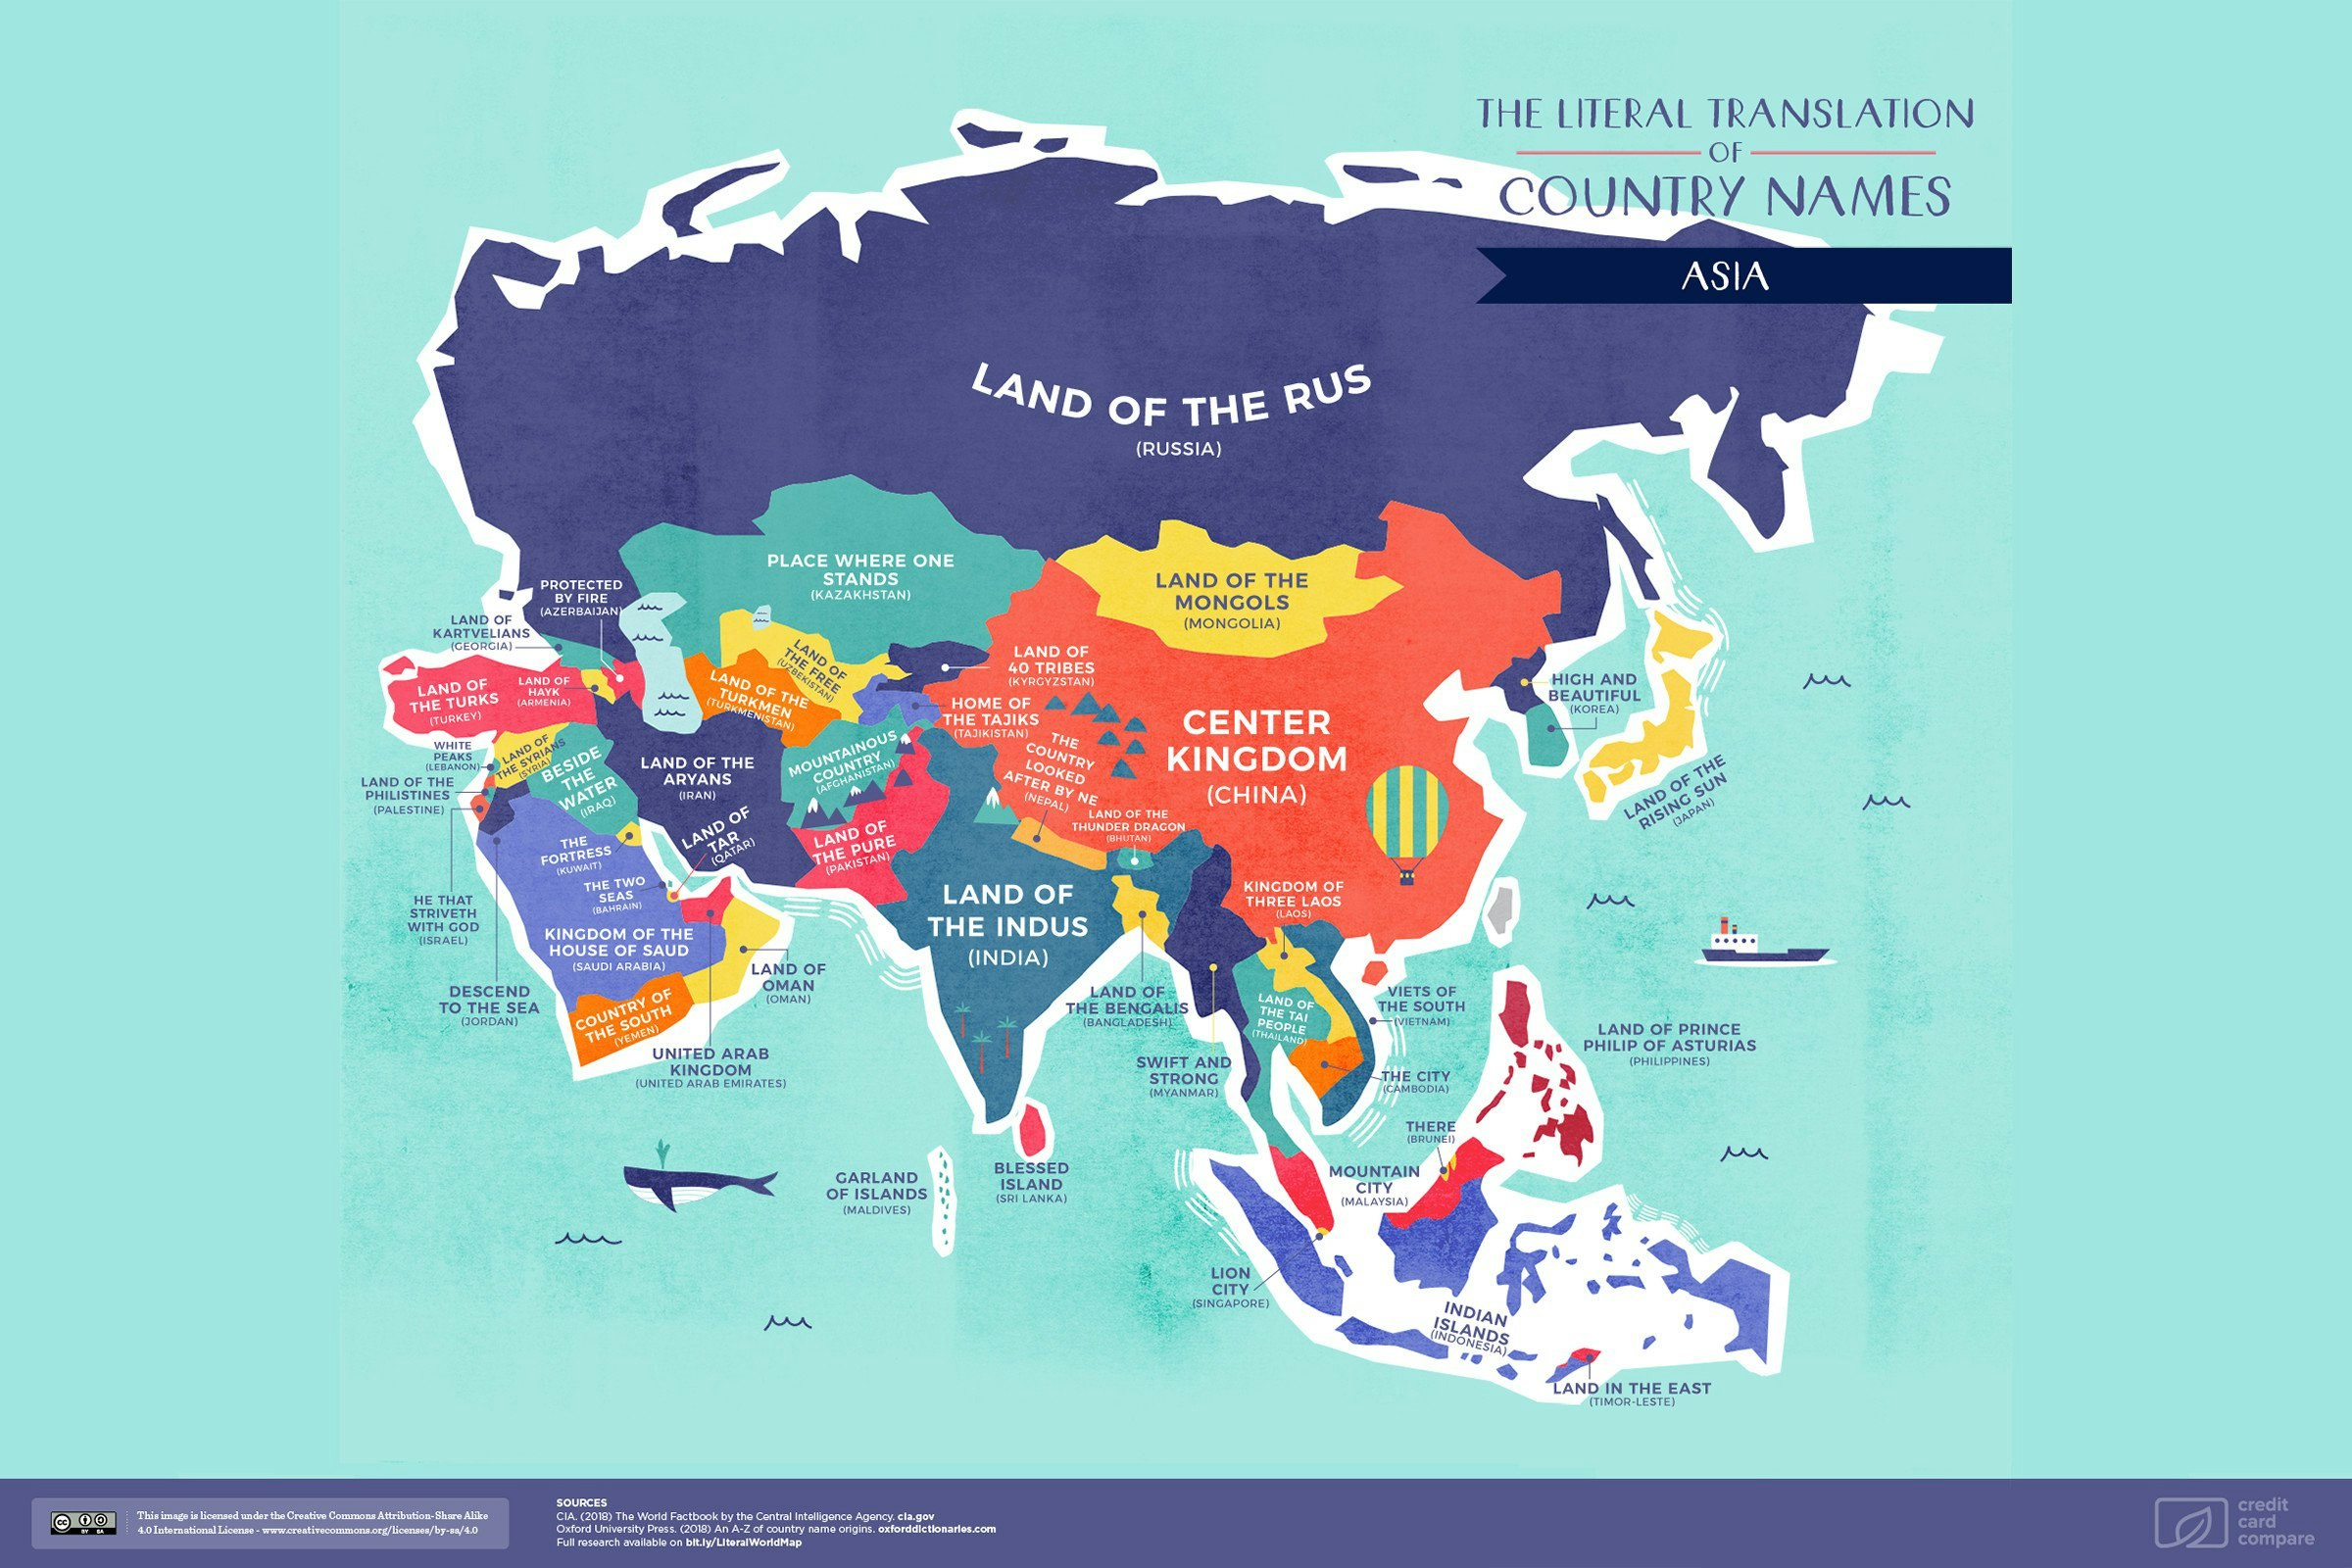 04_Literal-Translation-Of-Country-Names_Asia.or.original